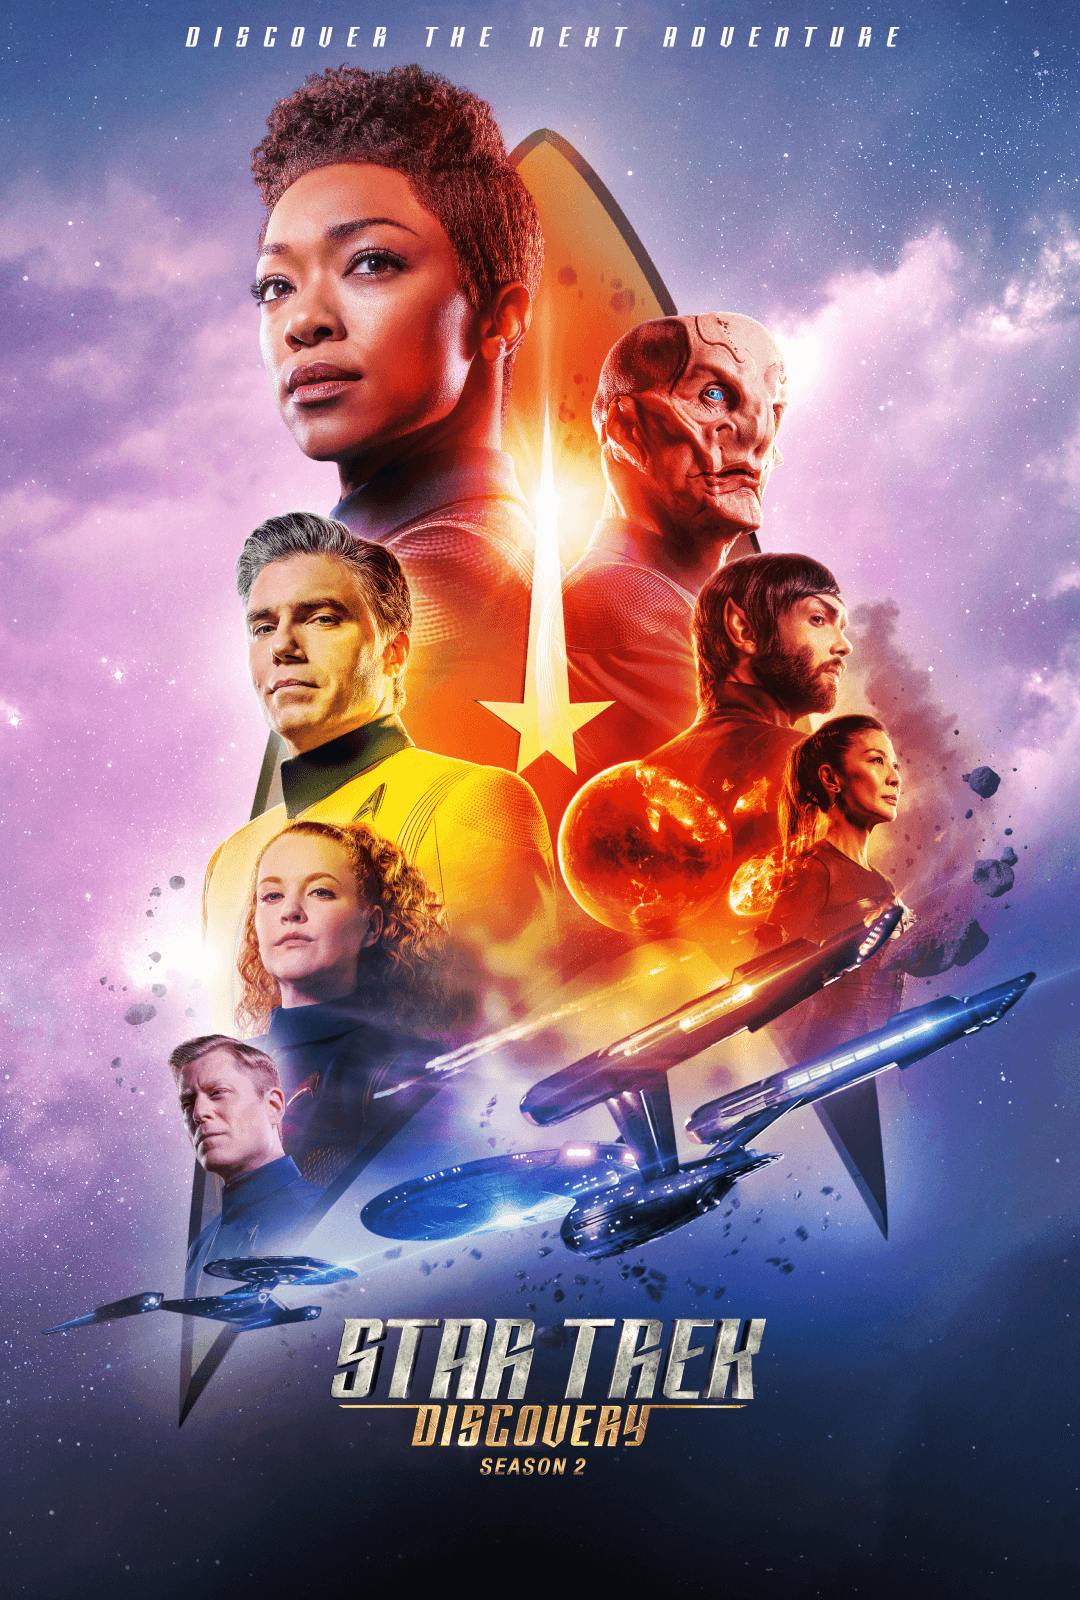 Star Trek, Cast, Characters, Synopsis, & Facts